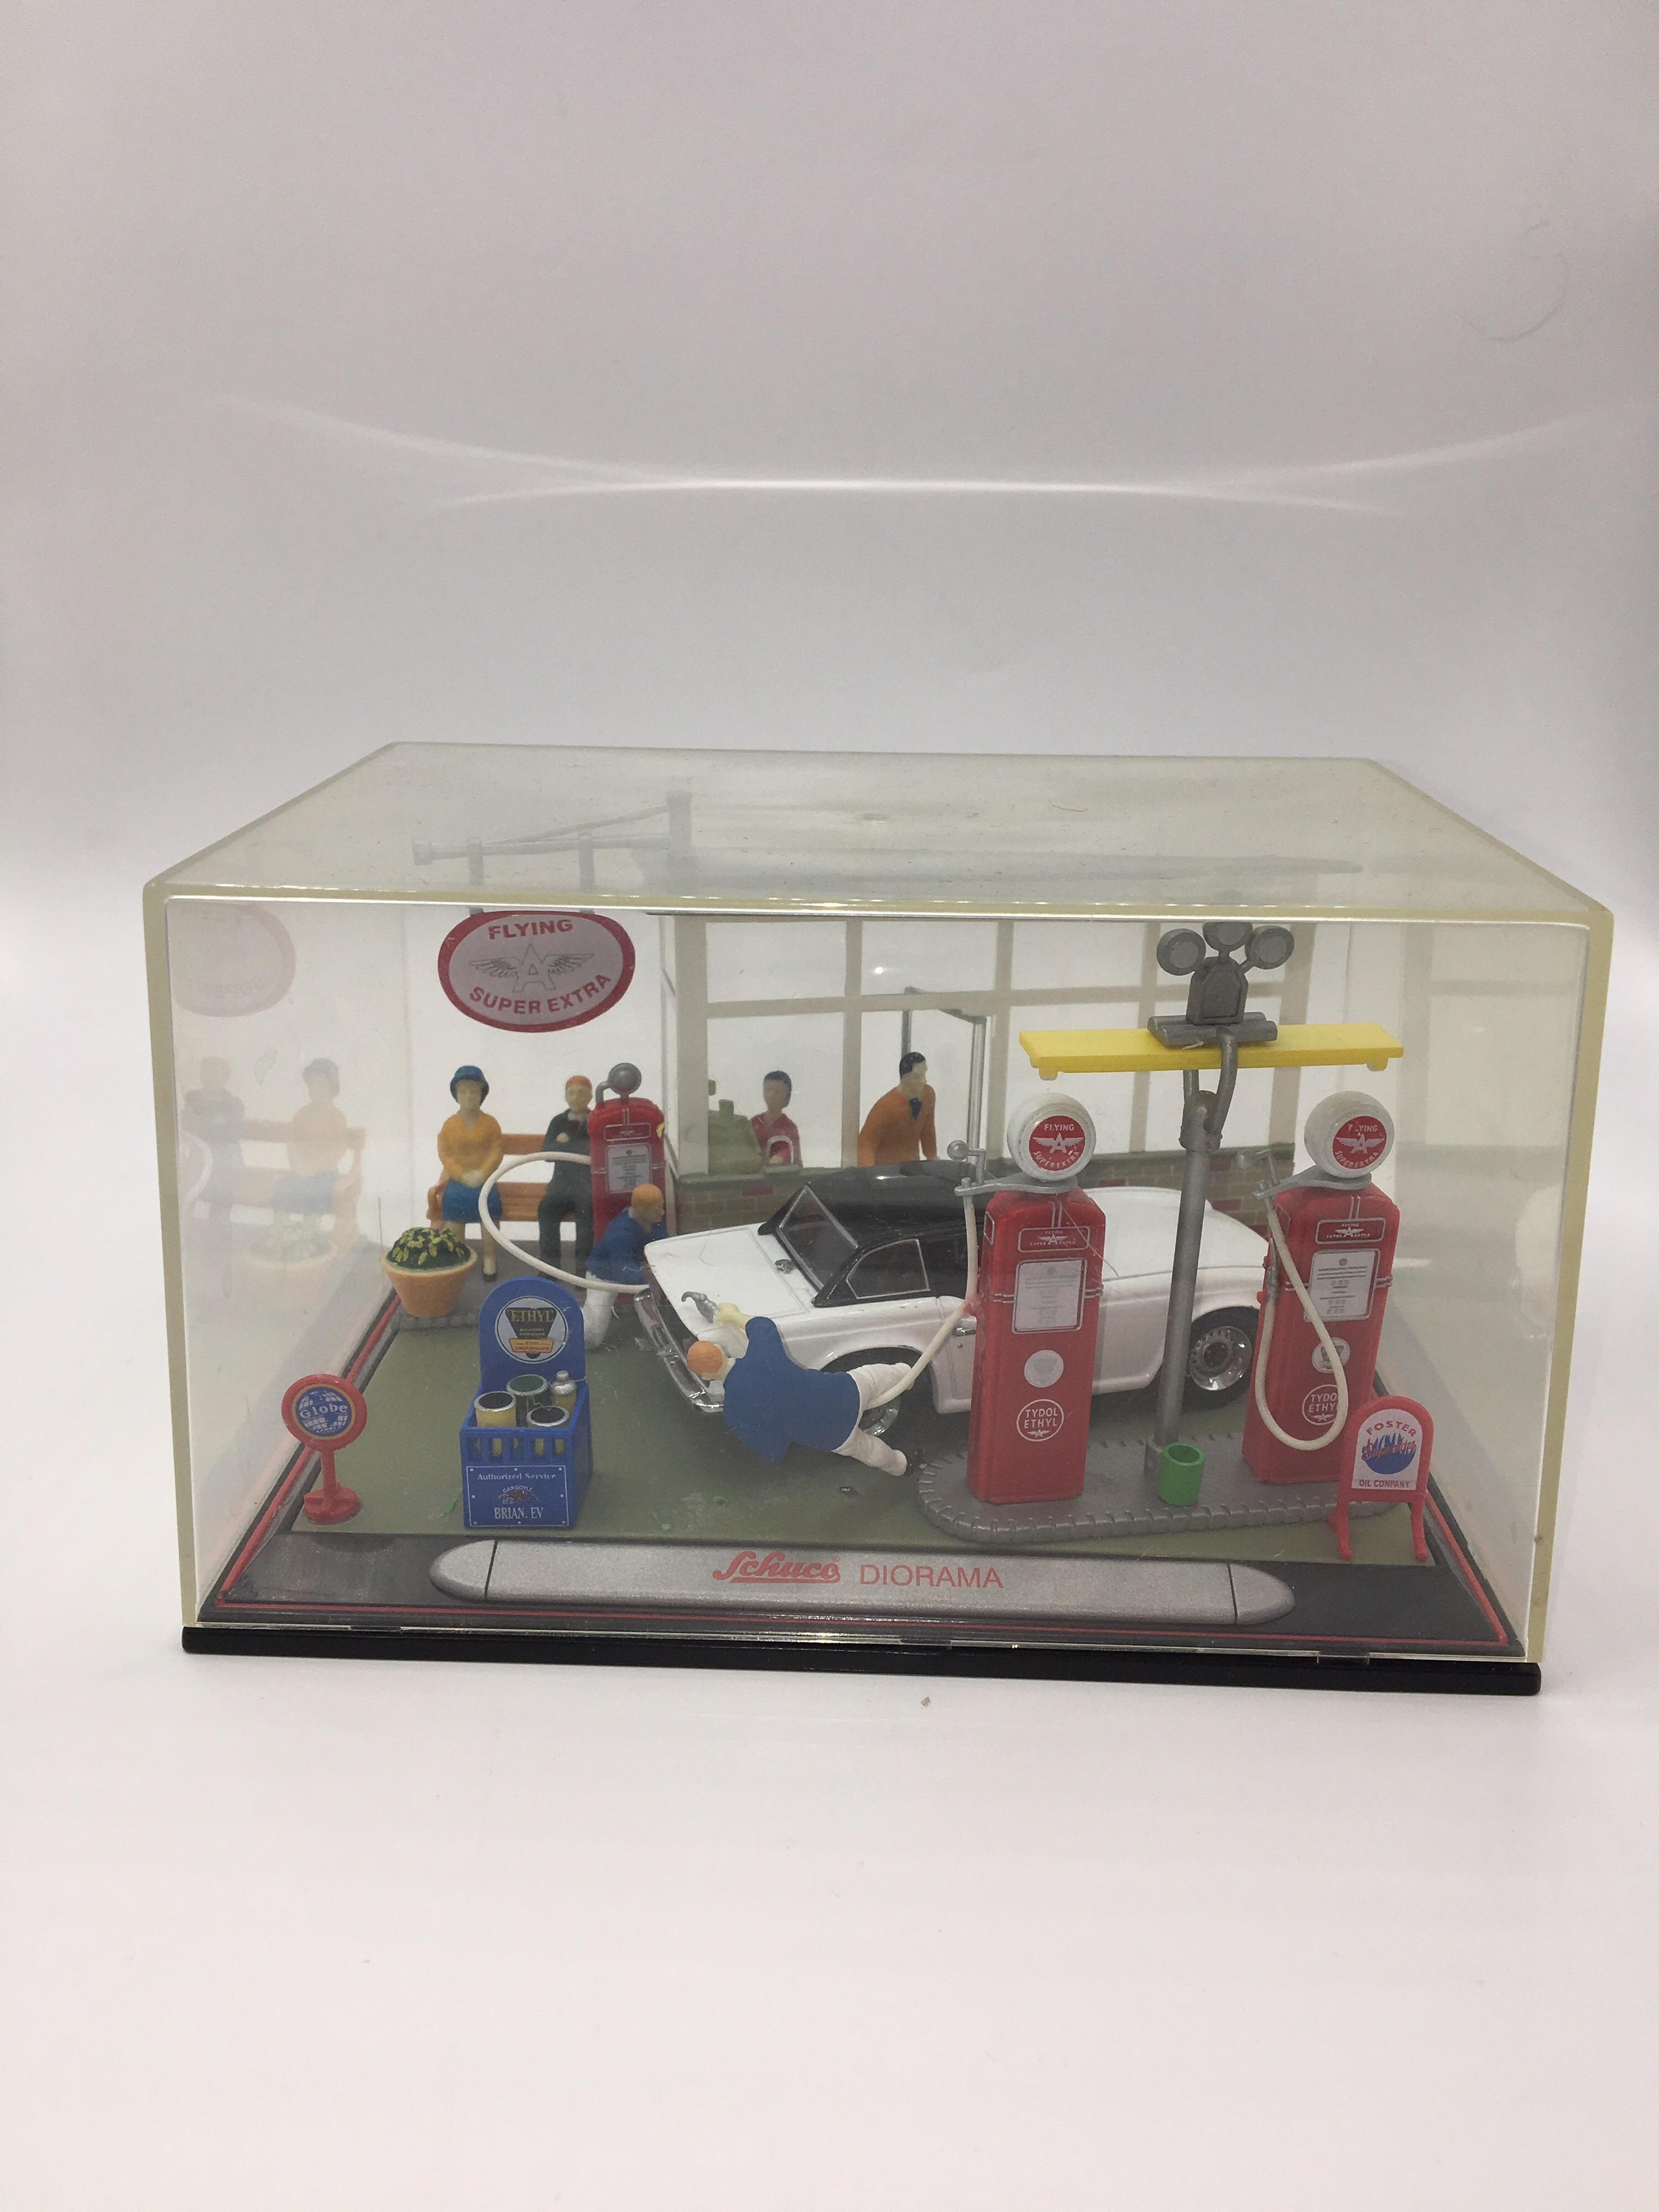 Beautiful diorama that represents a petrol station, where 2 mechanics are serving a MG B, while the occupants wait seated. Another client comes out of the station and a cashier is in charge of charging the services provided by the two operators. A